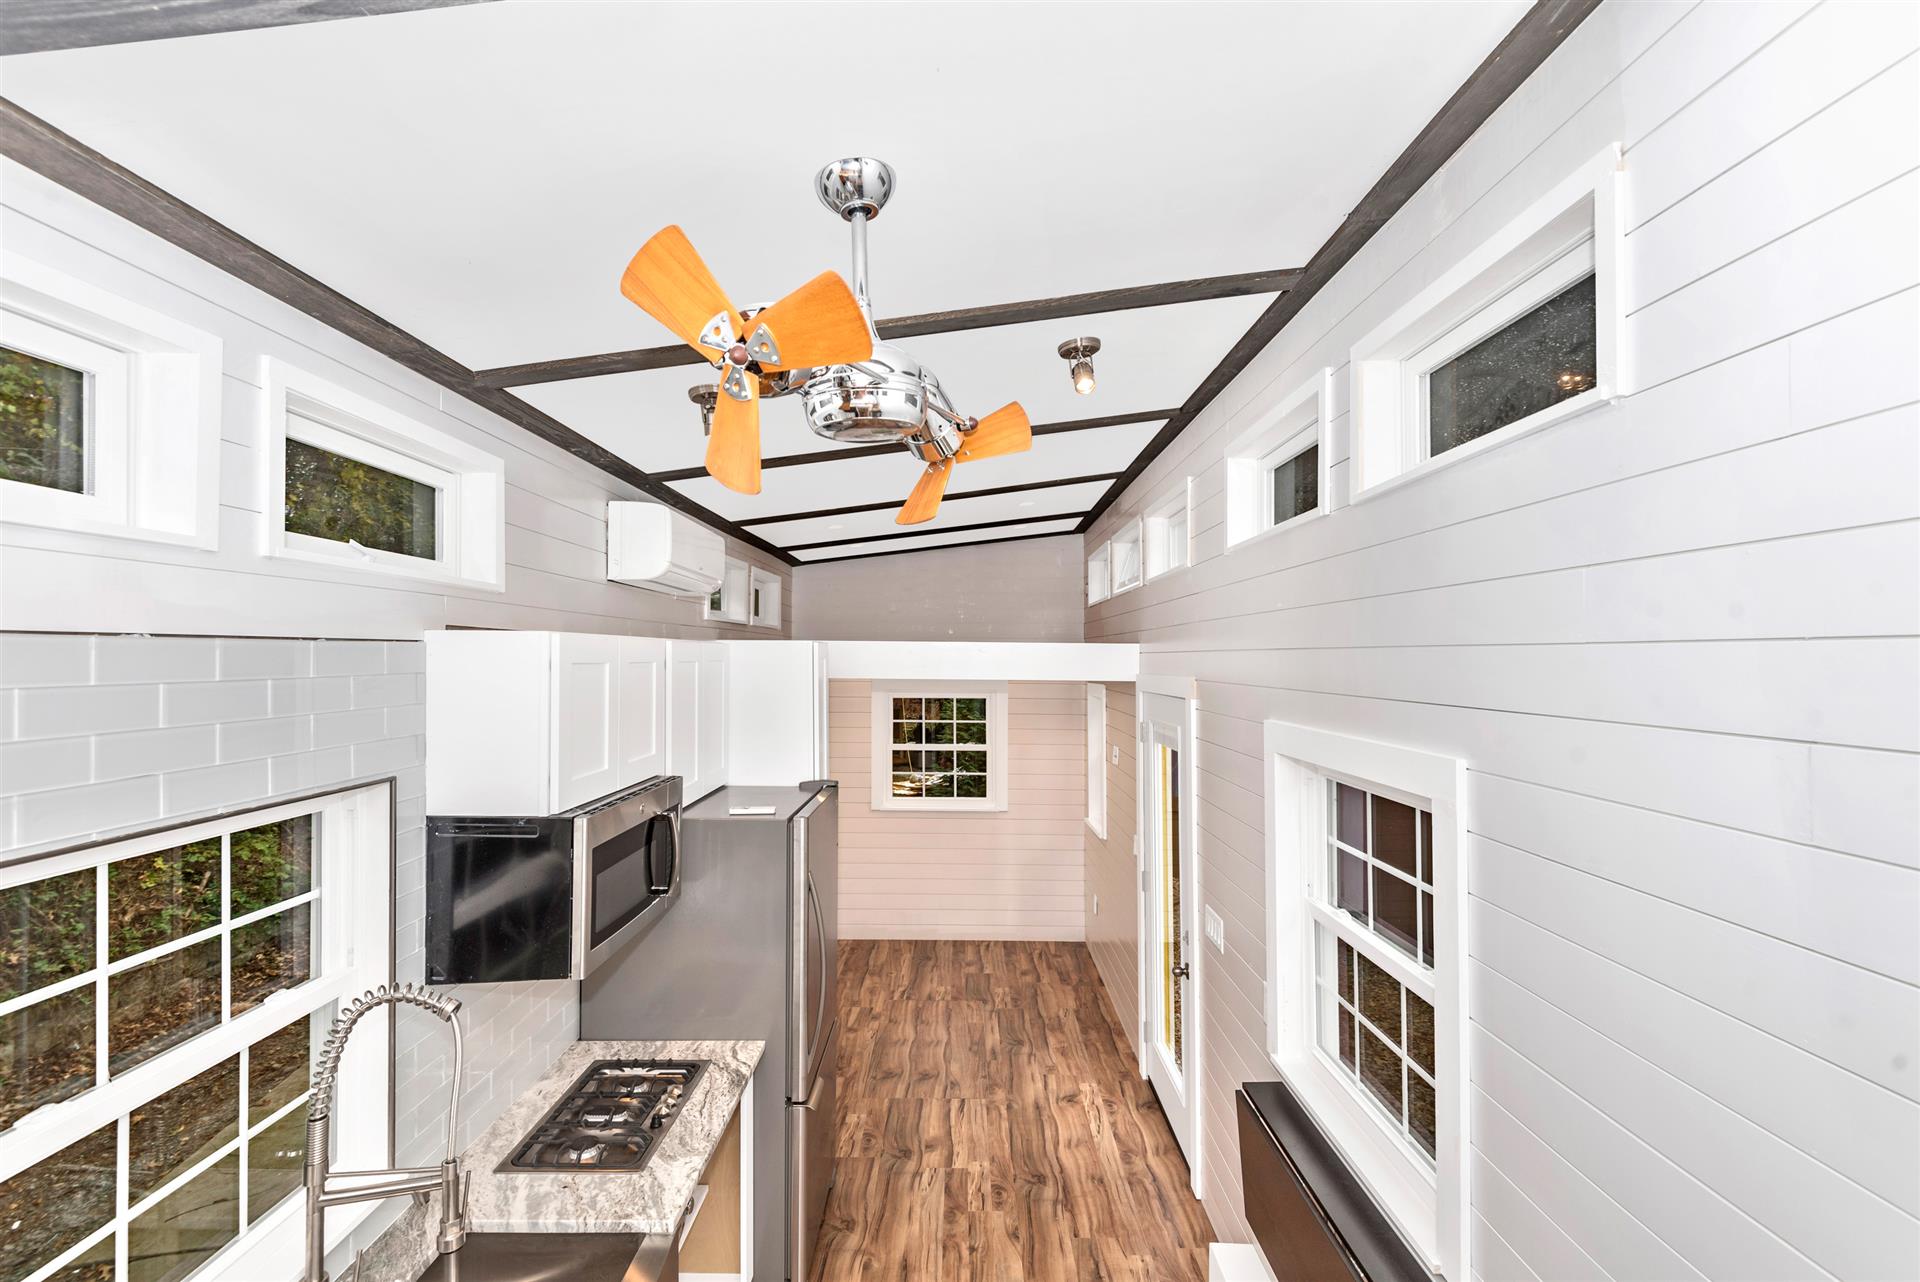 Ceiling Fan - Sanibel by Humble Houses